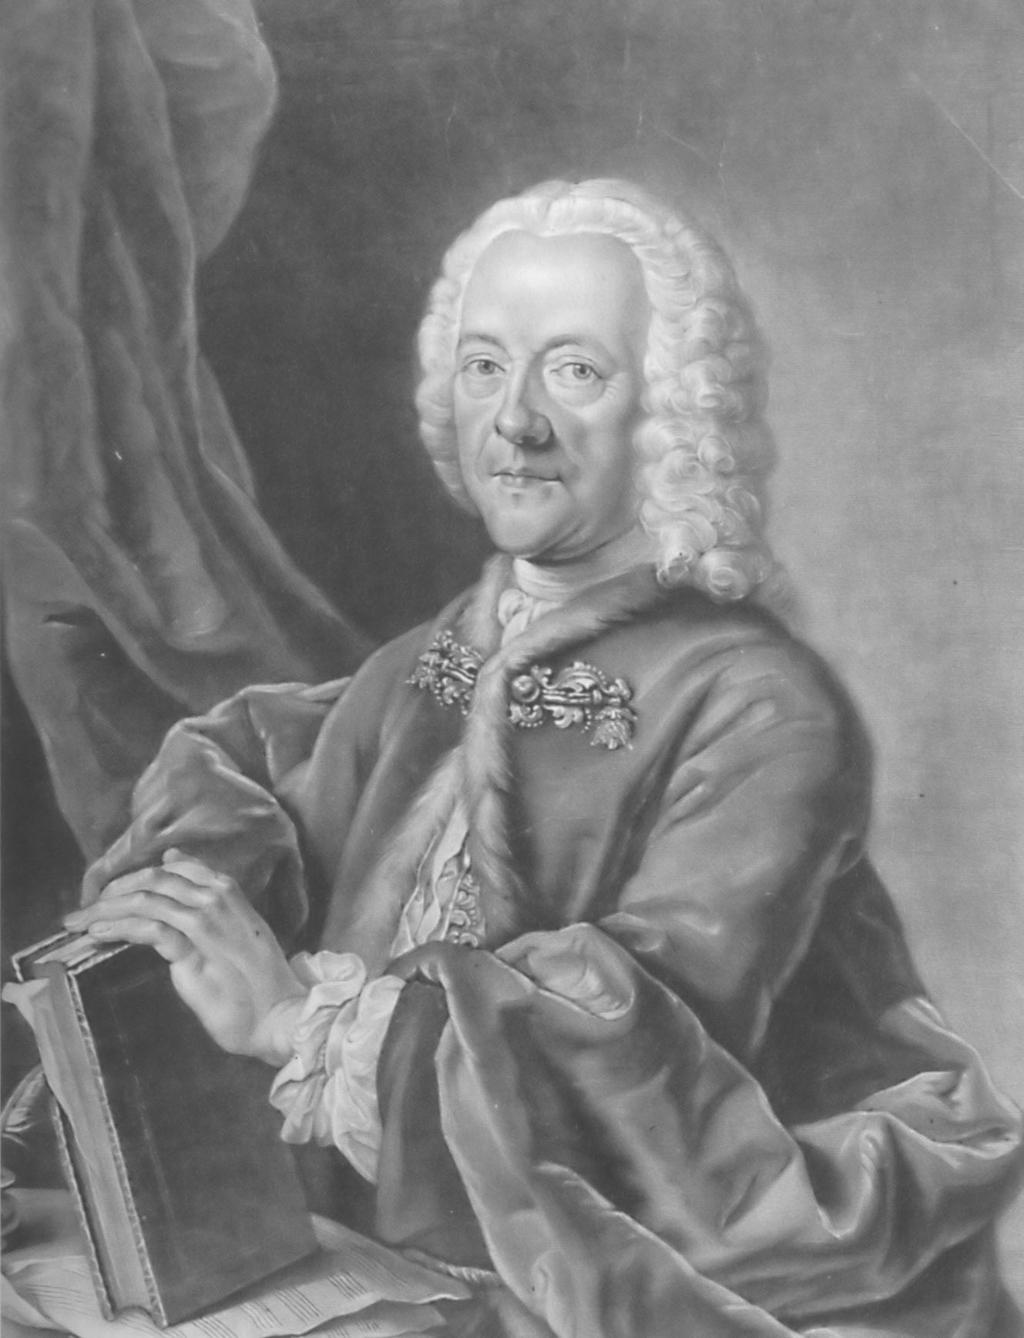 3 Learning ank: Georg Philipp Telemann (68 767) The music o Georg Philipp Telemann, a leading German composer in the irst hal o the 8th century, marked a transition between the baroque style o J.S.